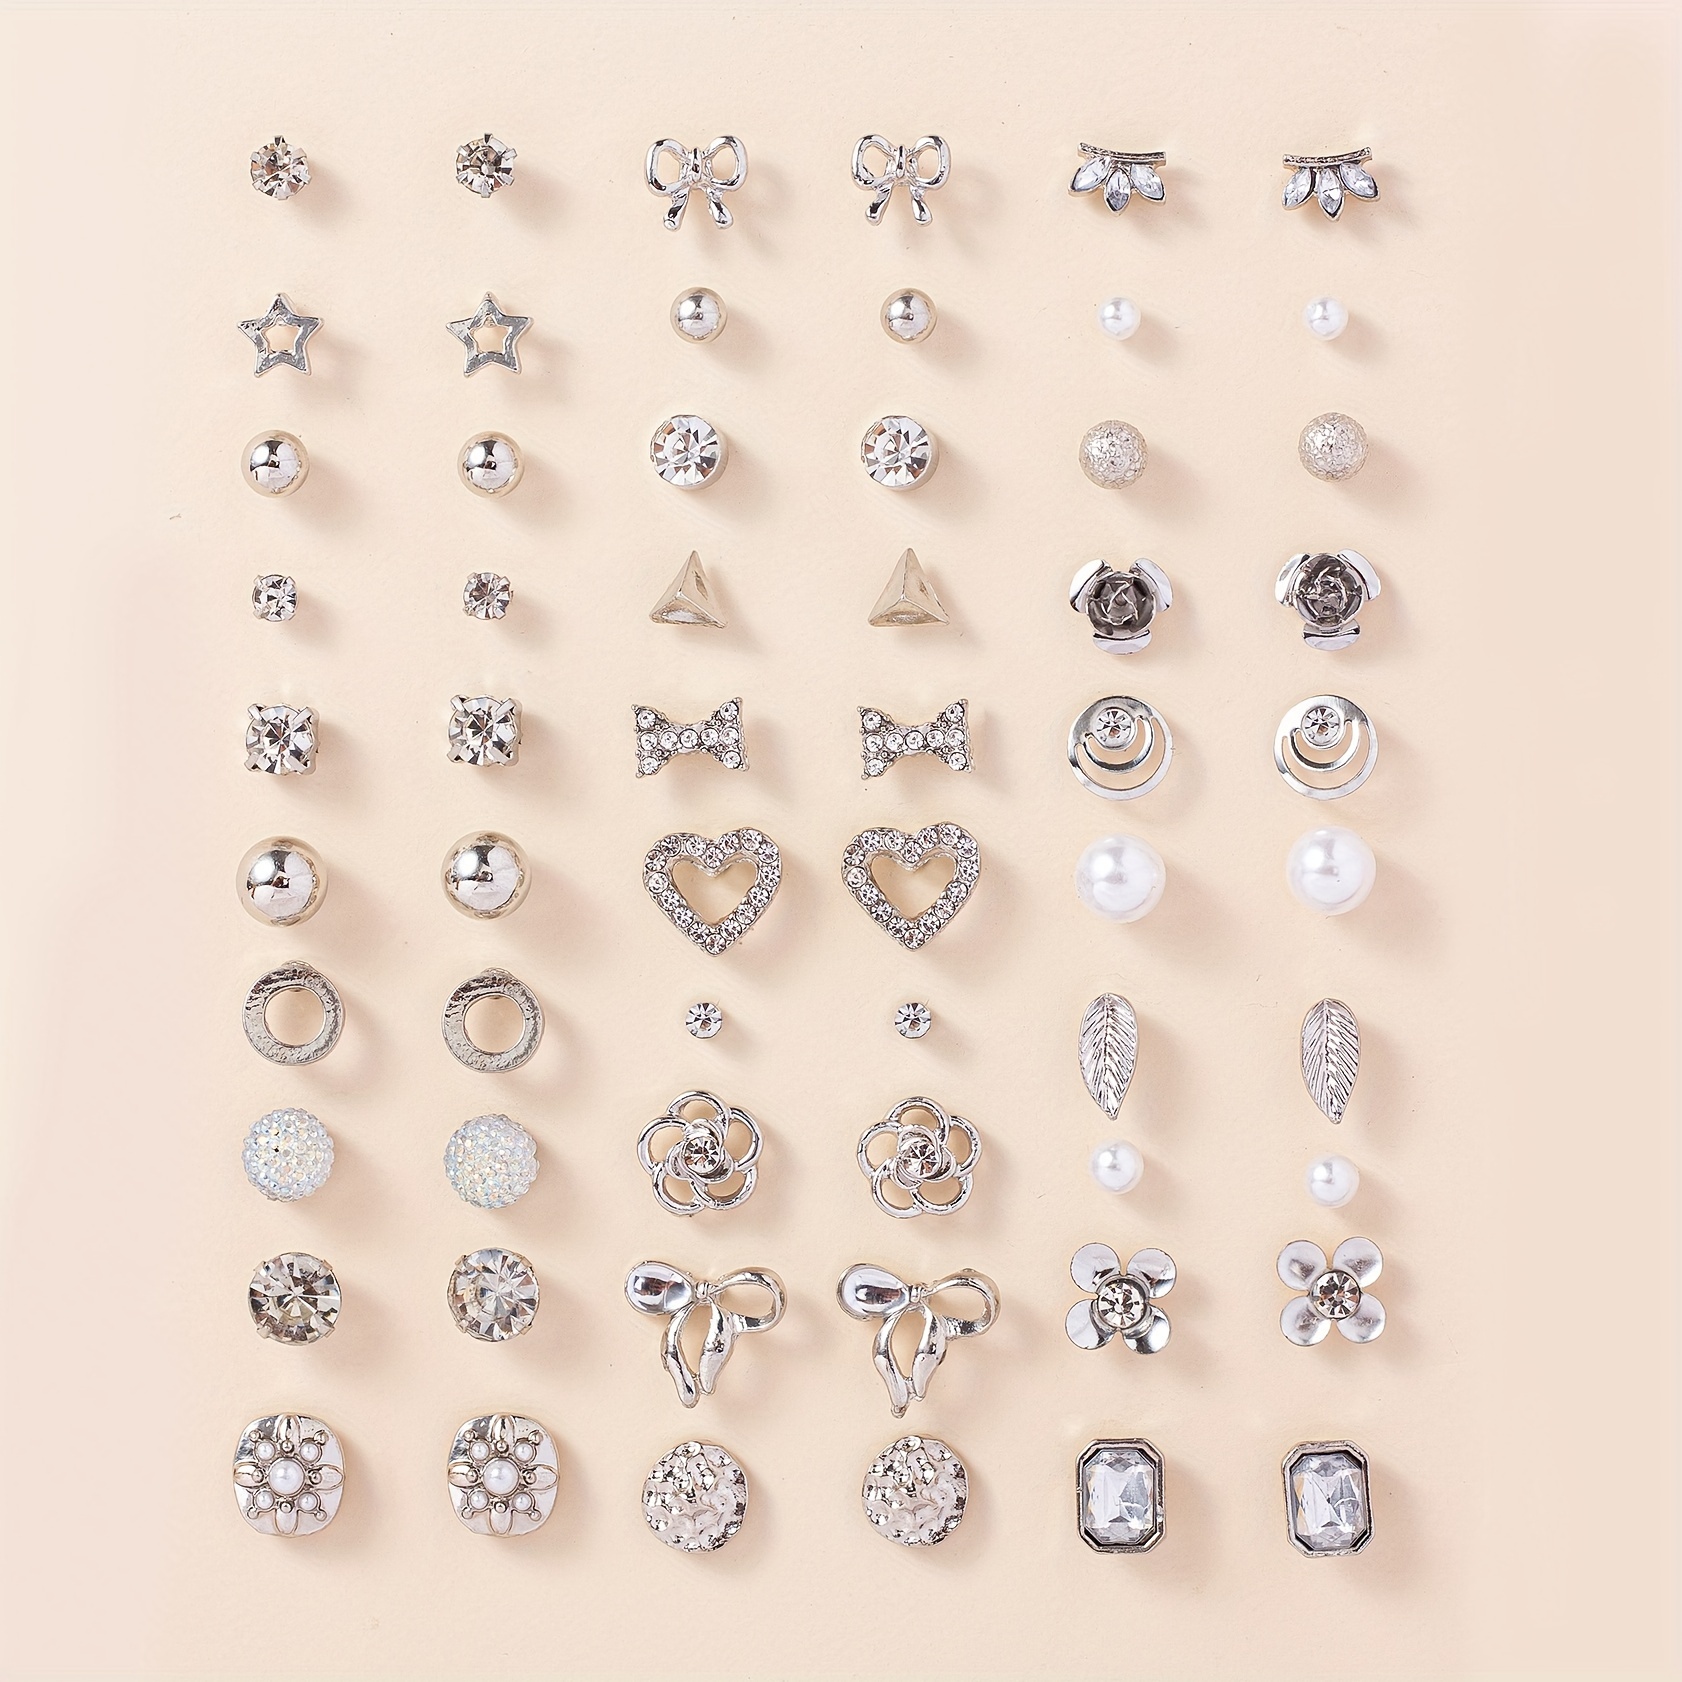 

Exquisite 30 Pairs Set Of Tiny Stud Earrings Heart Bow Round Design Zinc Alloy Jewelry Embellished With Zircon Delicate Gift For Women